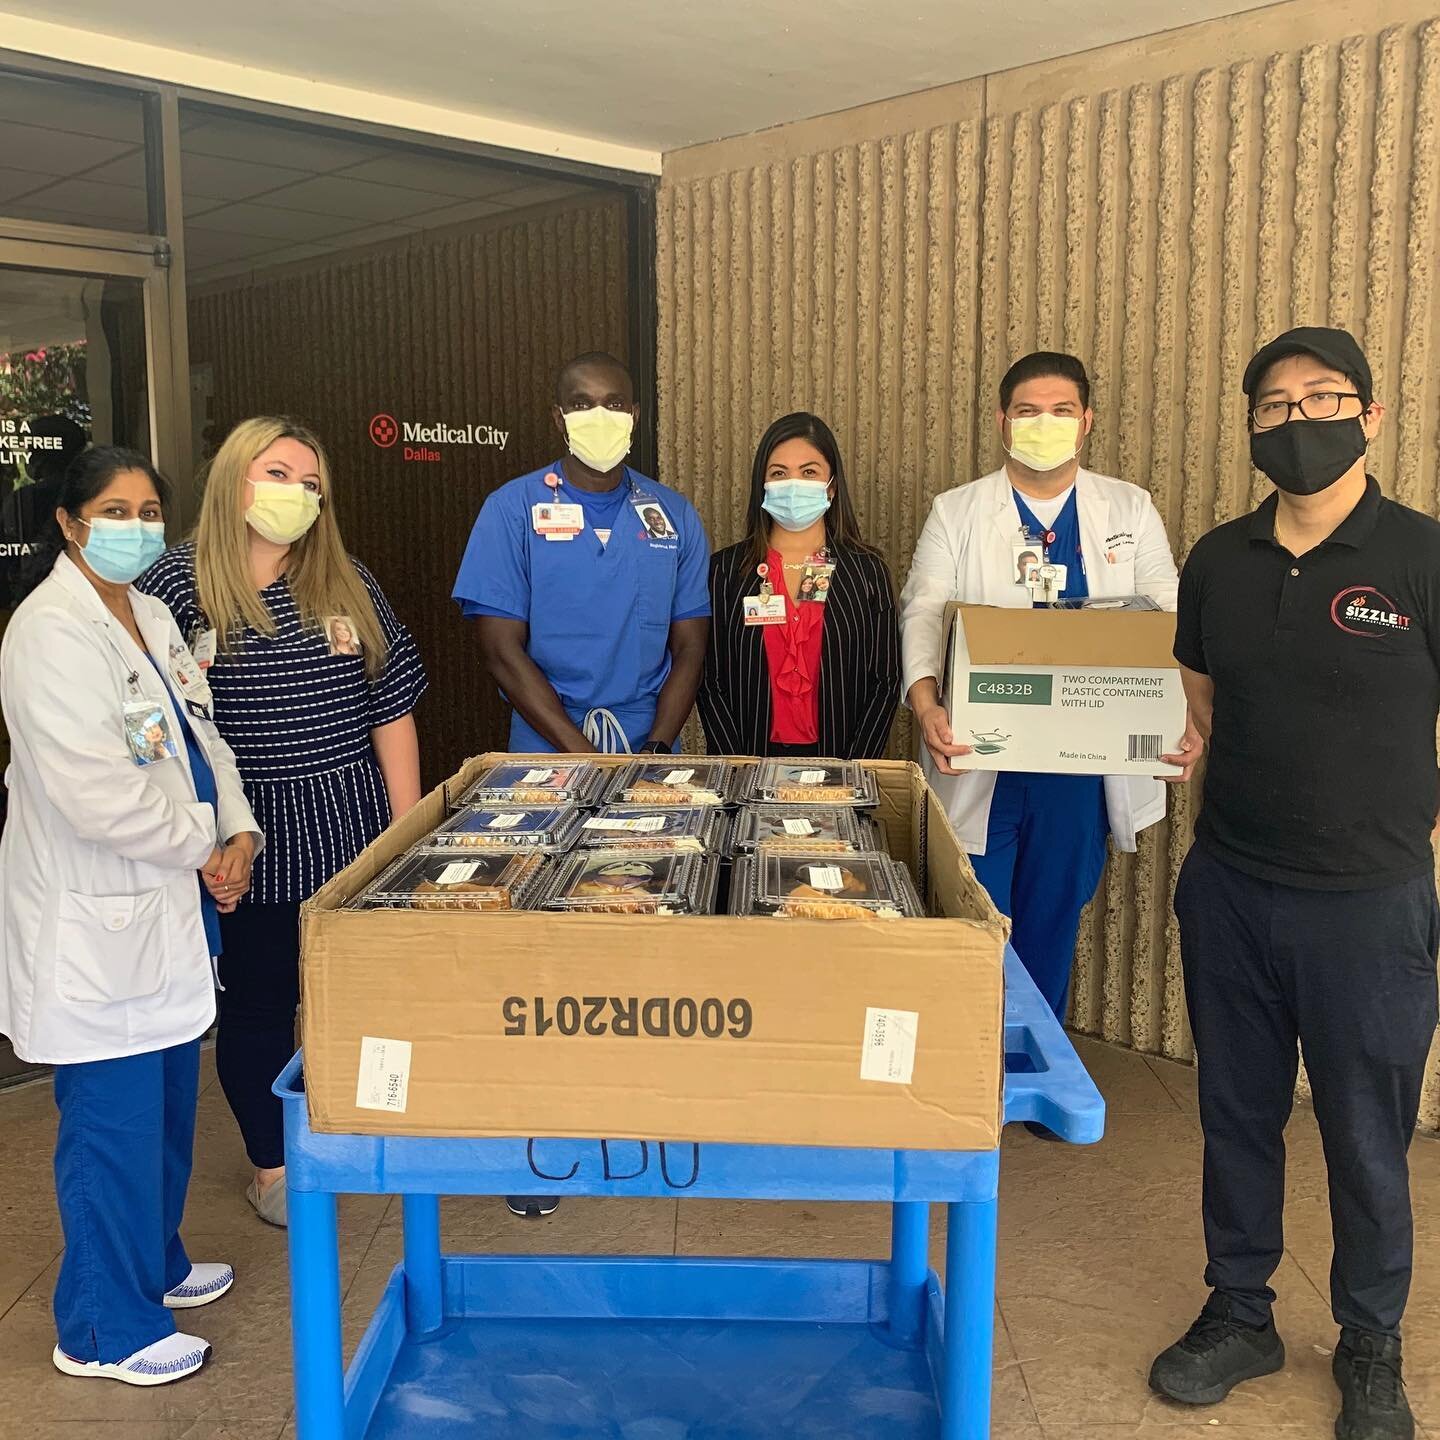 Thank you @sizzleitrestaurant for preparing 310 meals for our frontline Covid-19 healthcare workers! @AscendNorthTexas partnered with SizzleIt, a family-owned Asian-fusion restaurant in Plano, Texas, to prepare food for hospital workers at Children's